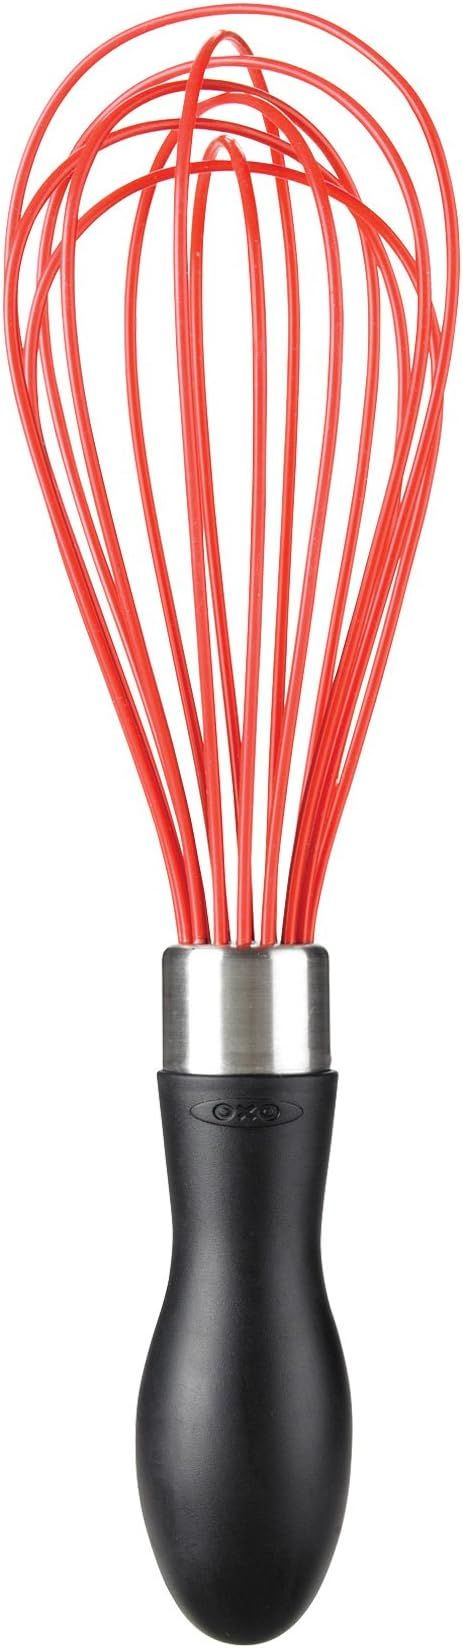 OXO Good Grips Better Silicone Whisk, 9-Inch, Red,Red/Black | Amazon (US)